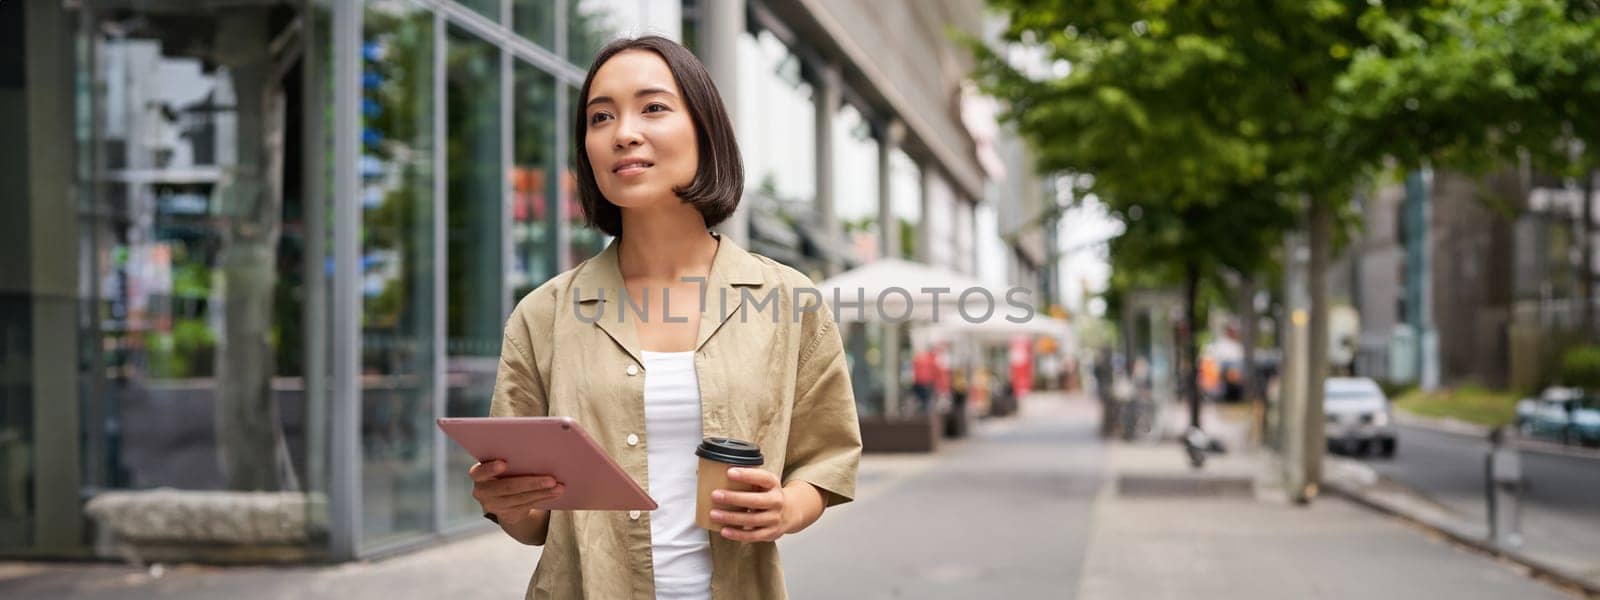 Portrait of smiling young woman walking in city with tablet, drinking takeaway coffee, going down the street with happy expression.